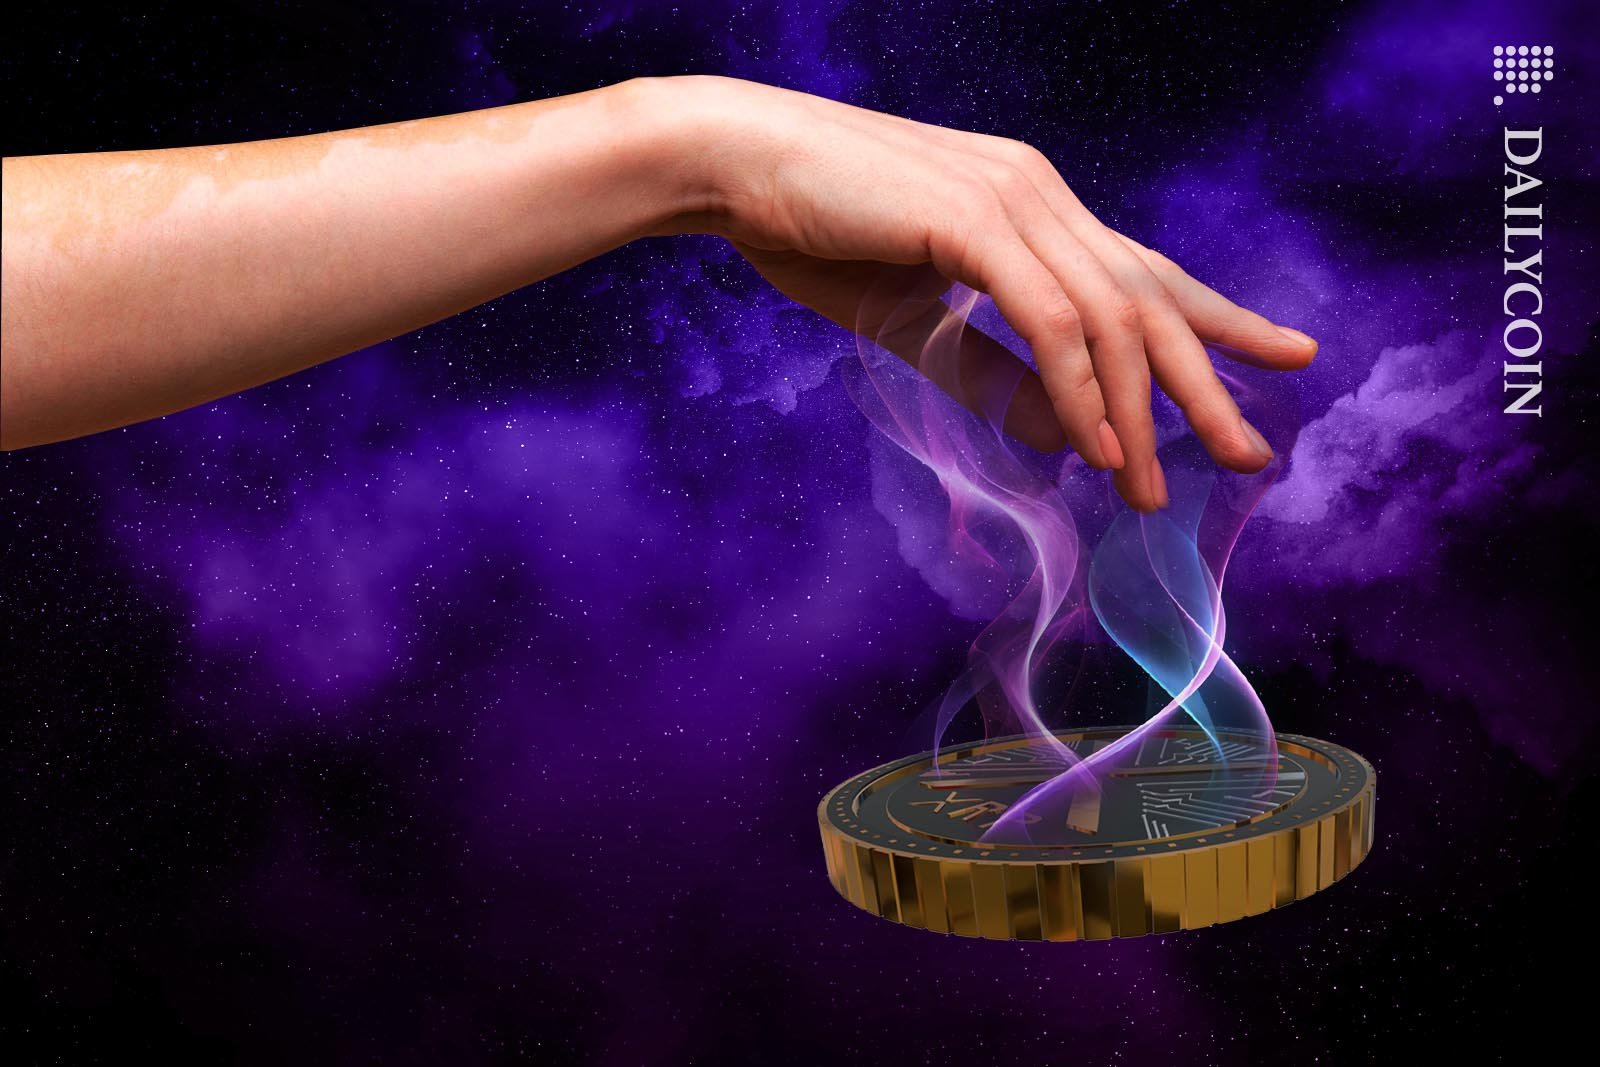 Hand in space attracting an XRP coin using energy waves.